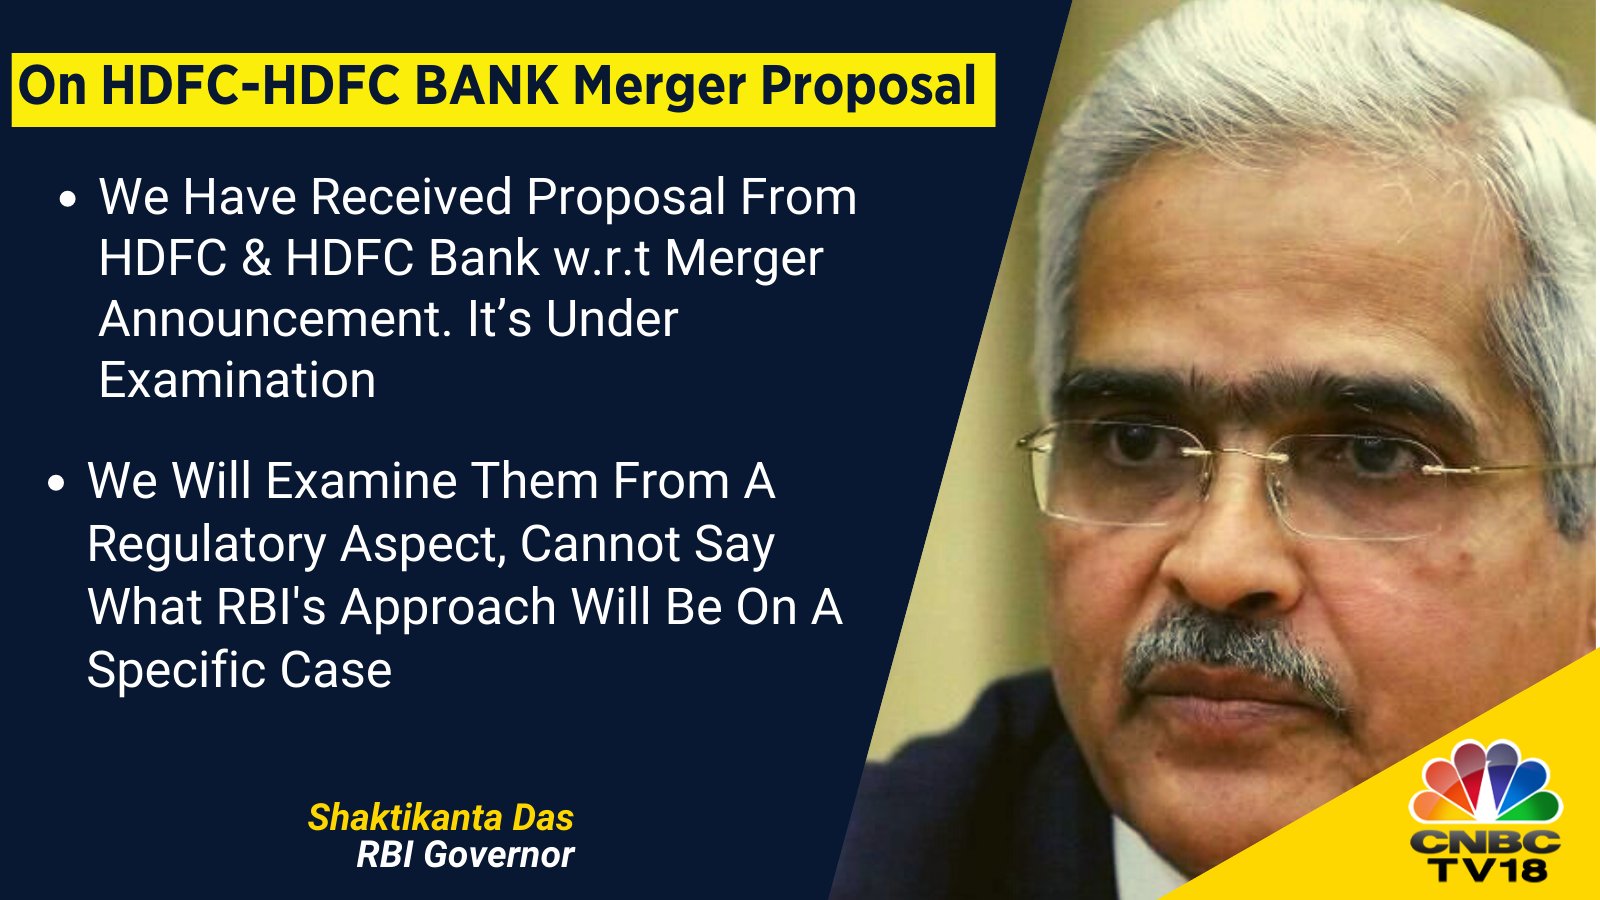 RBI Monetary Policy Highlights: Shaktikanta Das-led MPC holds rates, cuts GDP forecast, prioritises inflation before growth